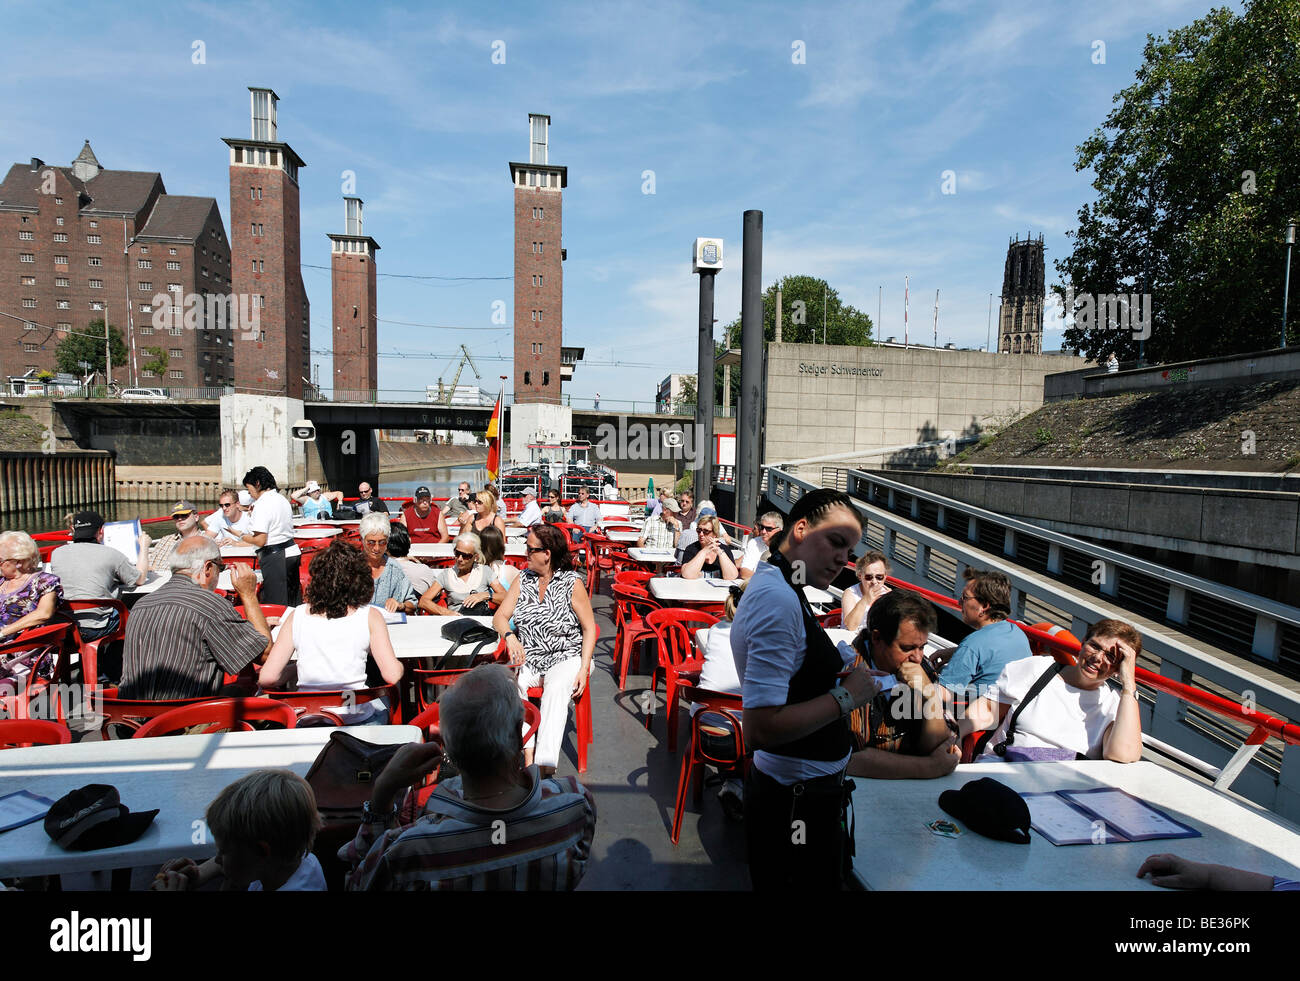 Sun deck of a cruise ship with tourists, view of the Schwanentorbruecke bridge, harbor cruise, outer harbor, Duisburg, Ruhrgebi Stock Photo